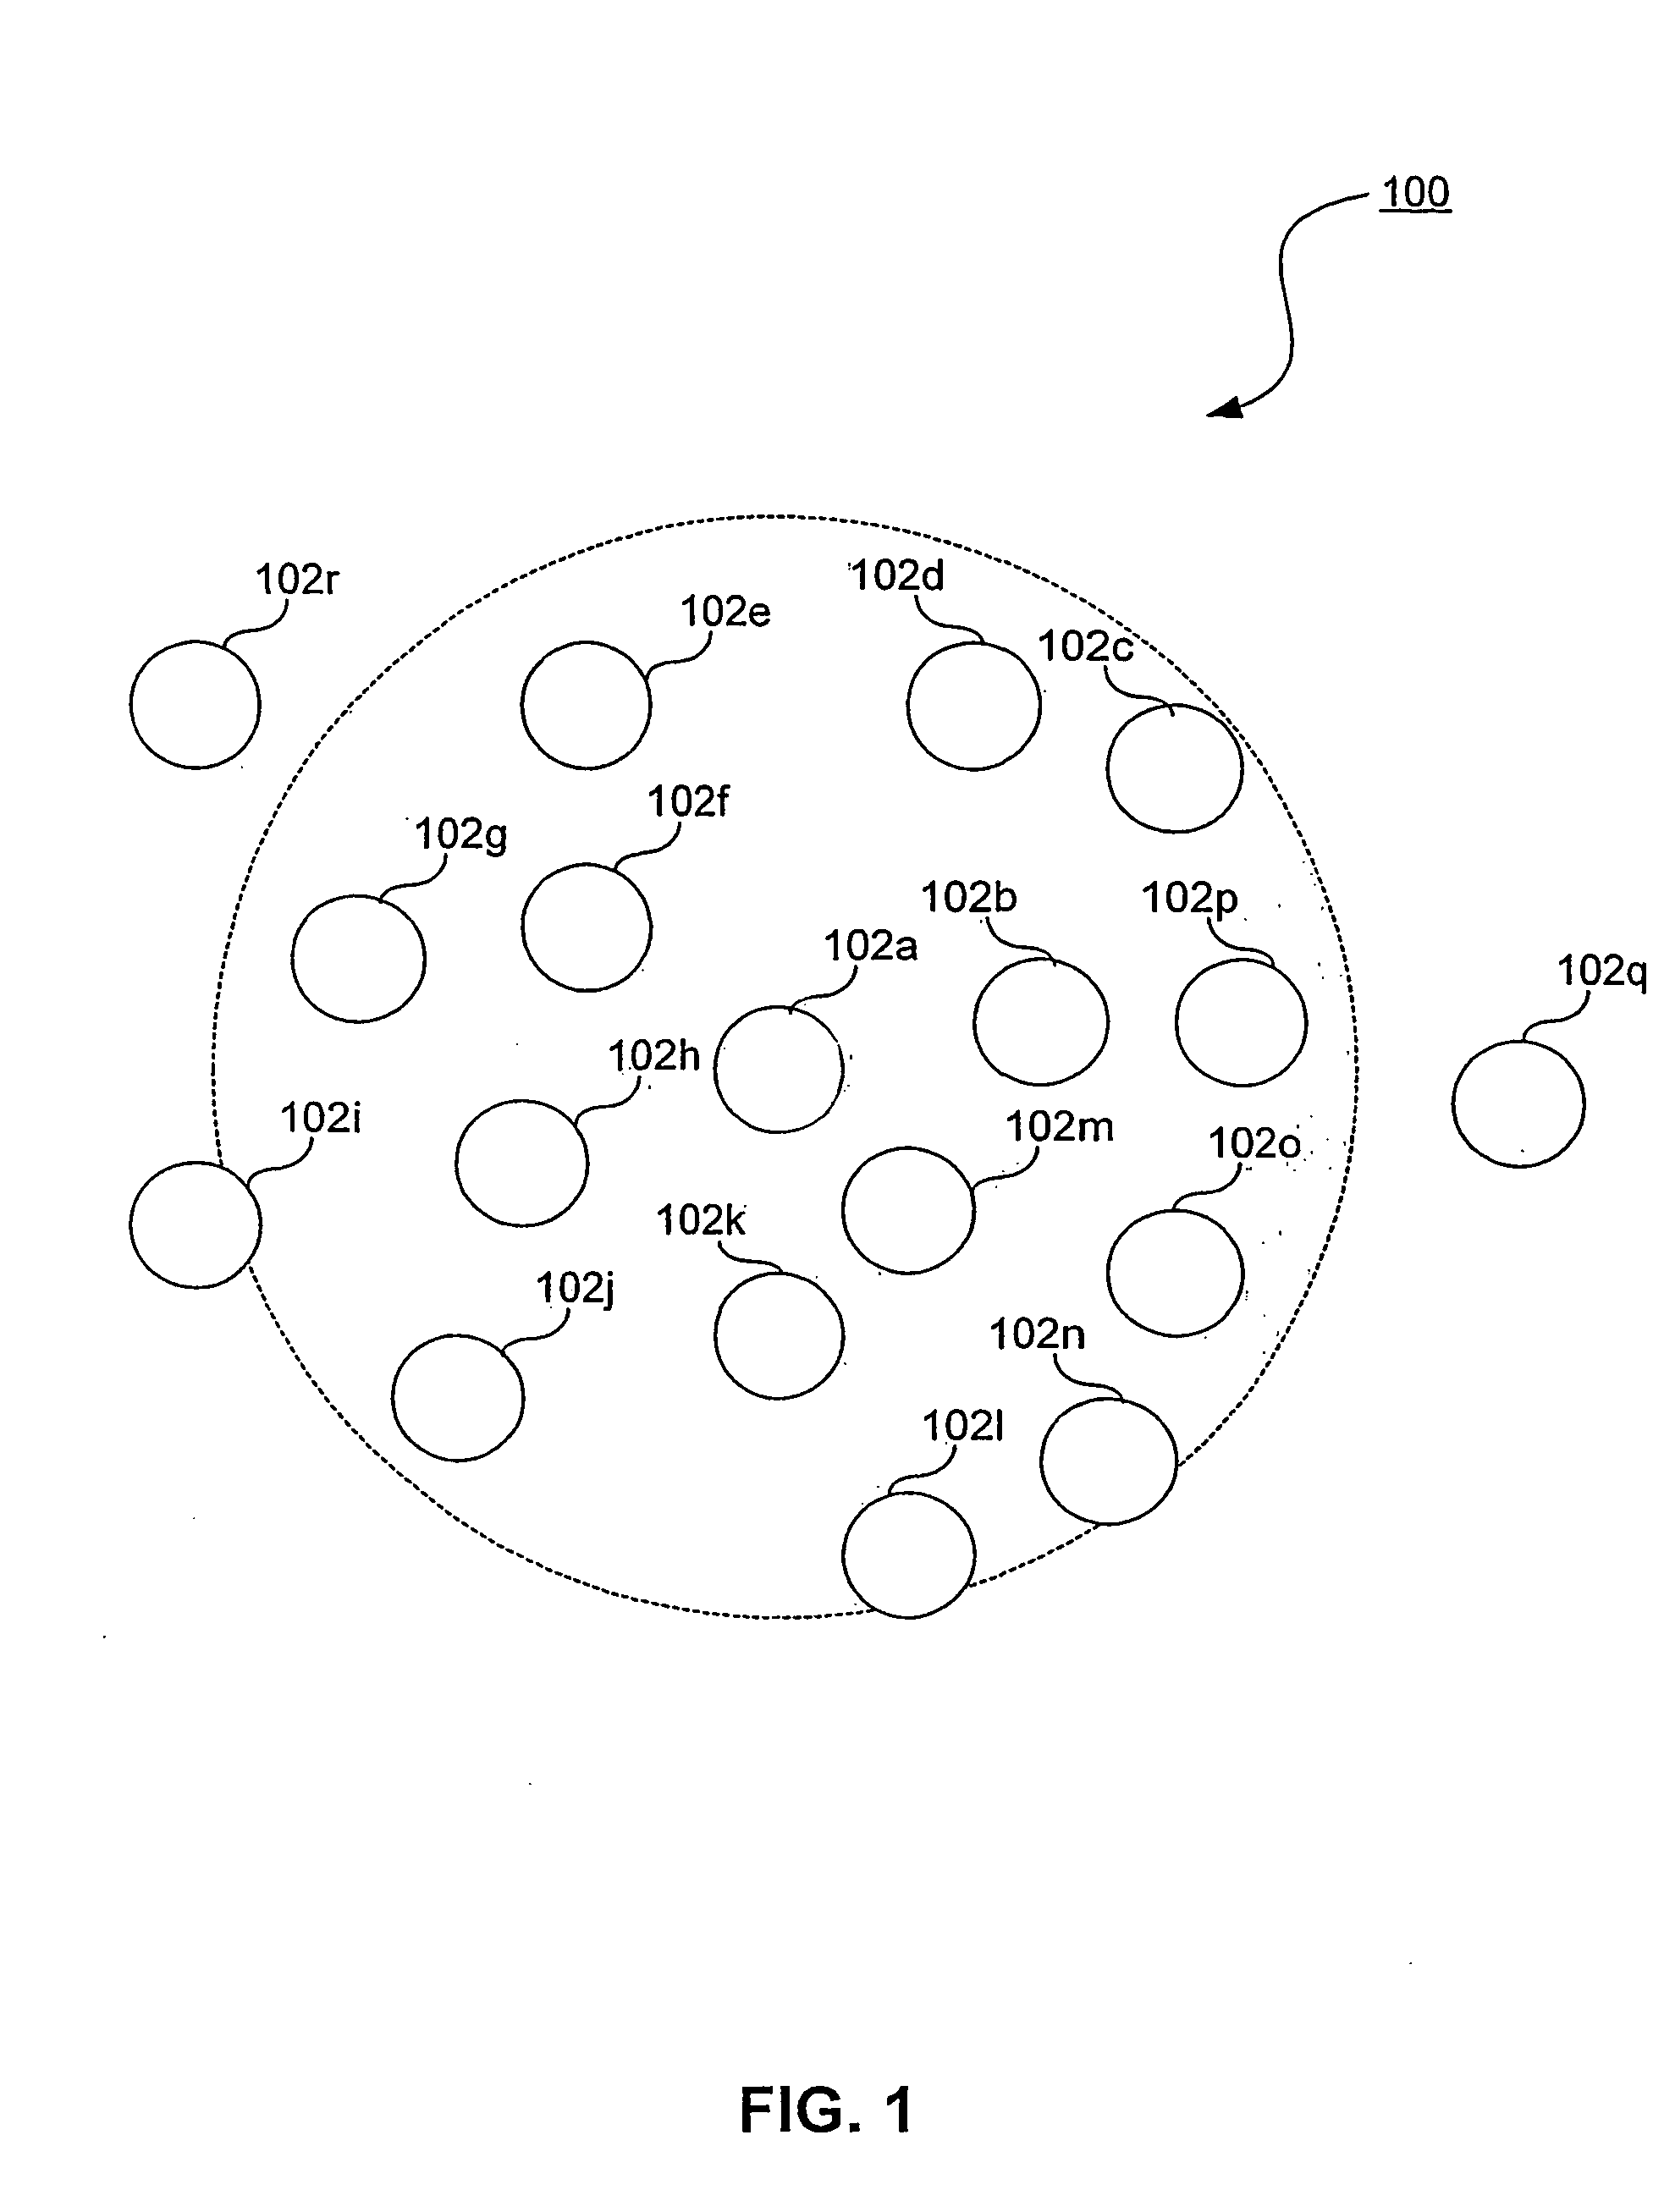 Method, system and computer program product for positioning and synchronizing wireless communications nodes